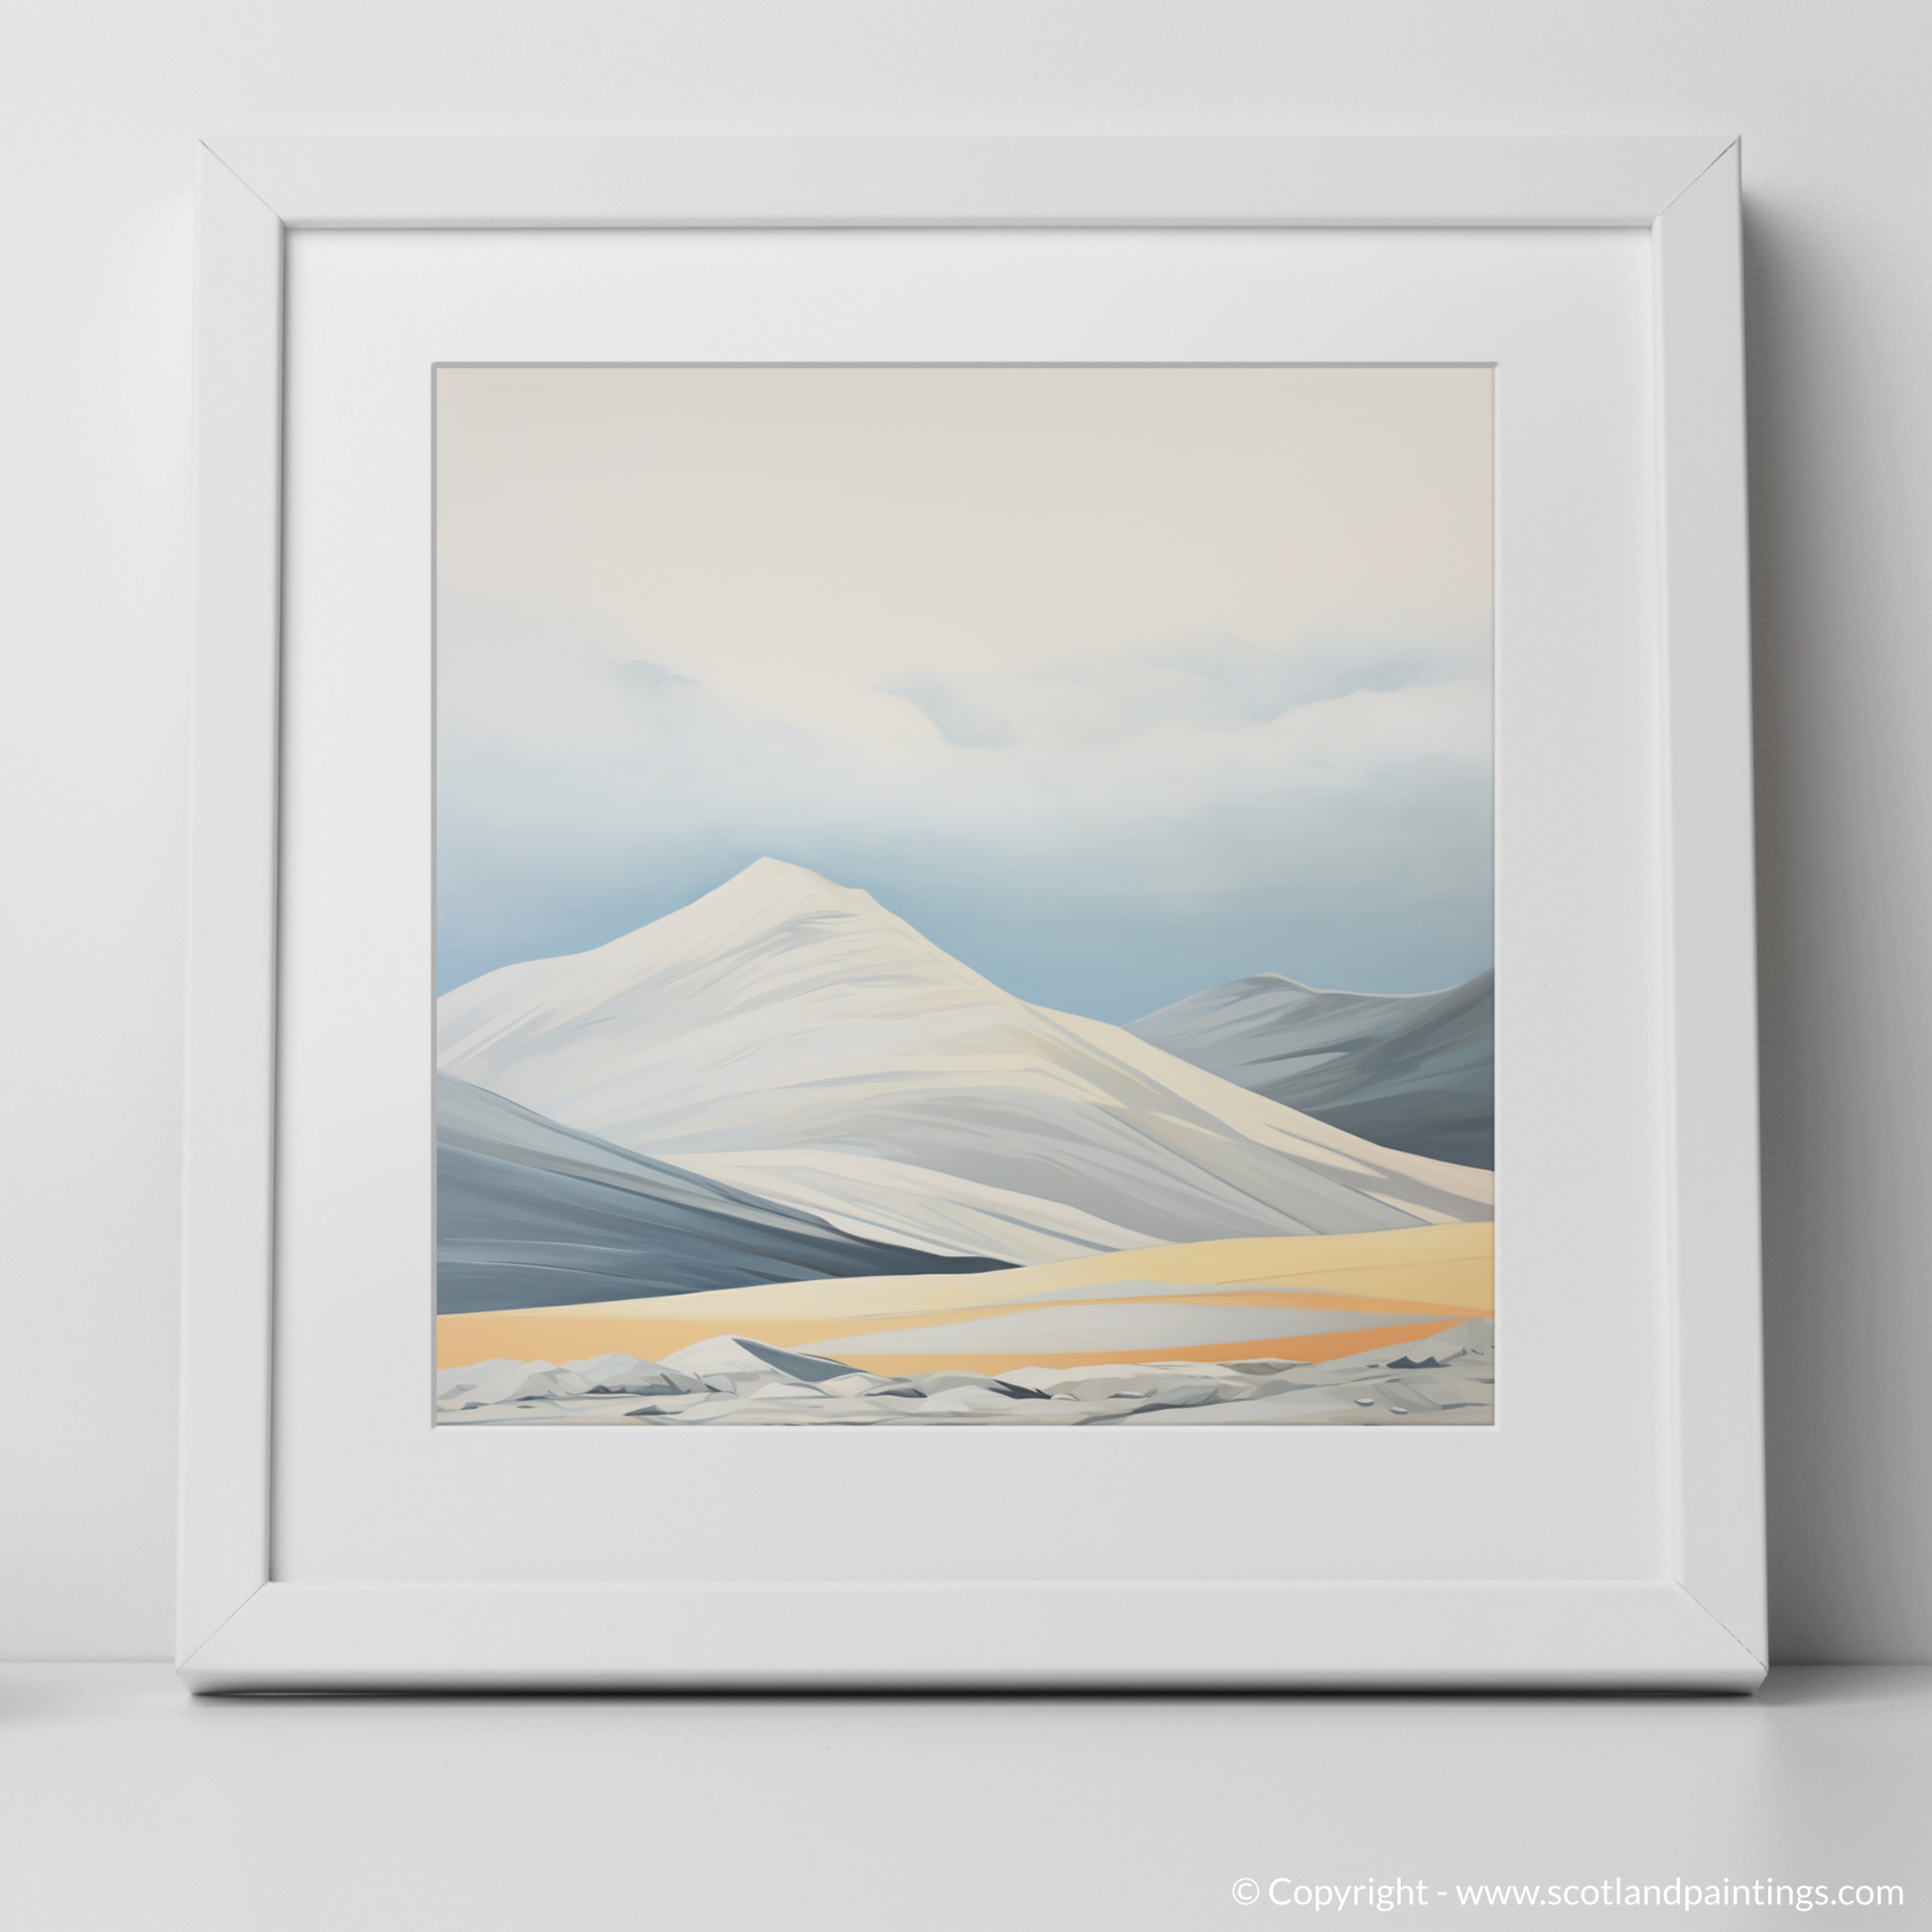 Art Print of Ben Lawers with a white frame